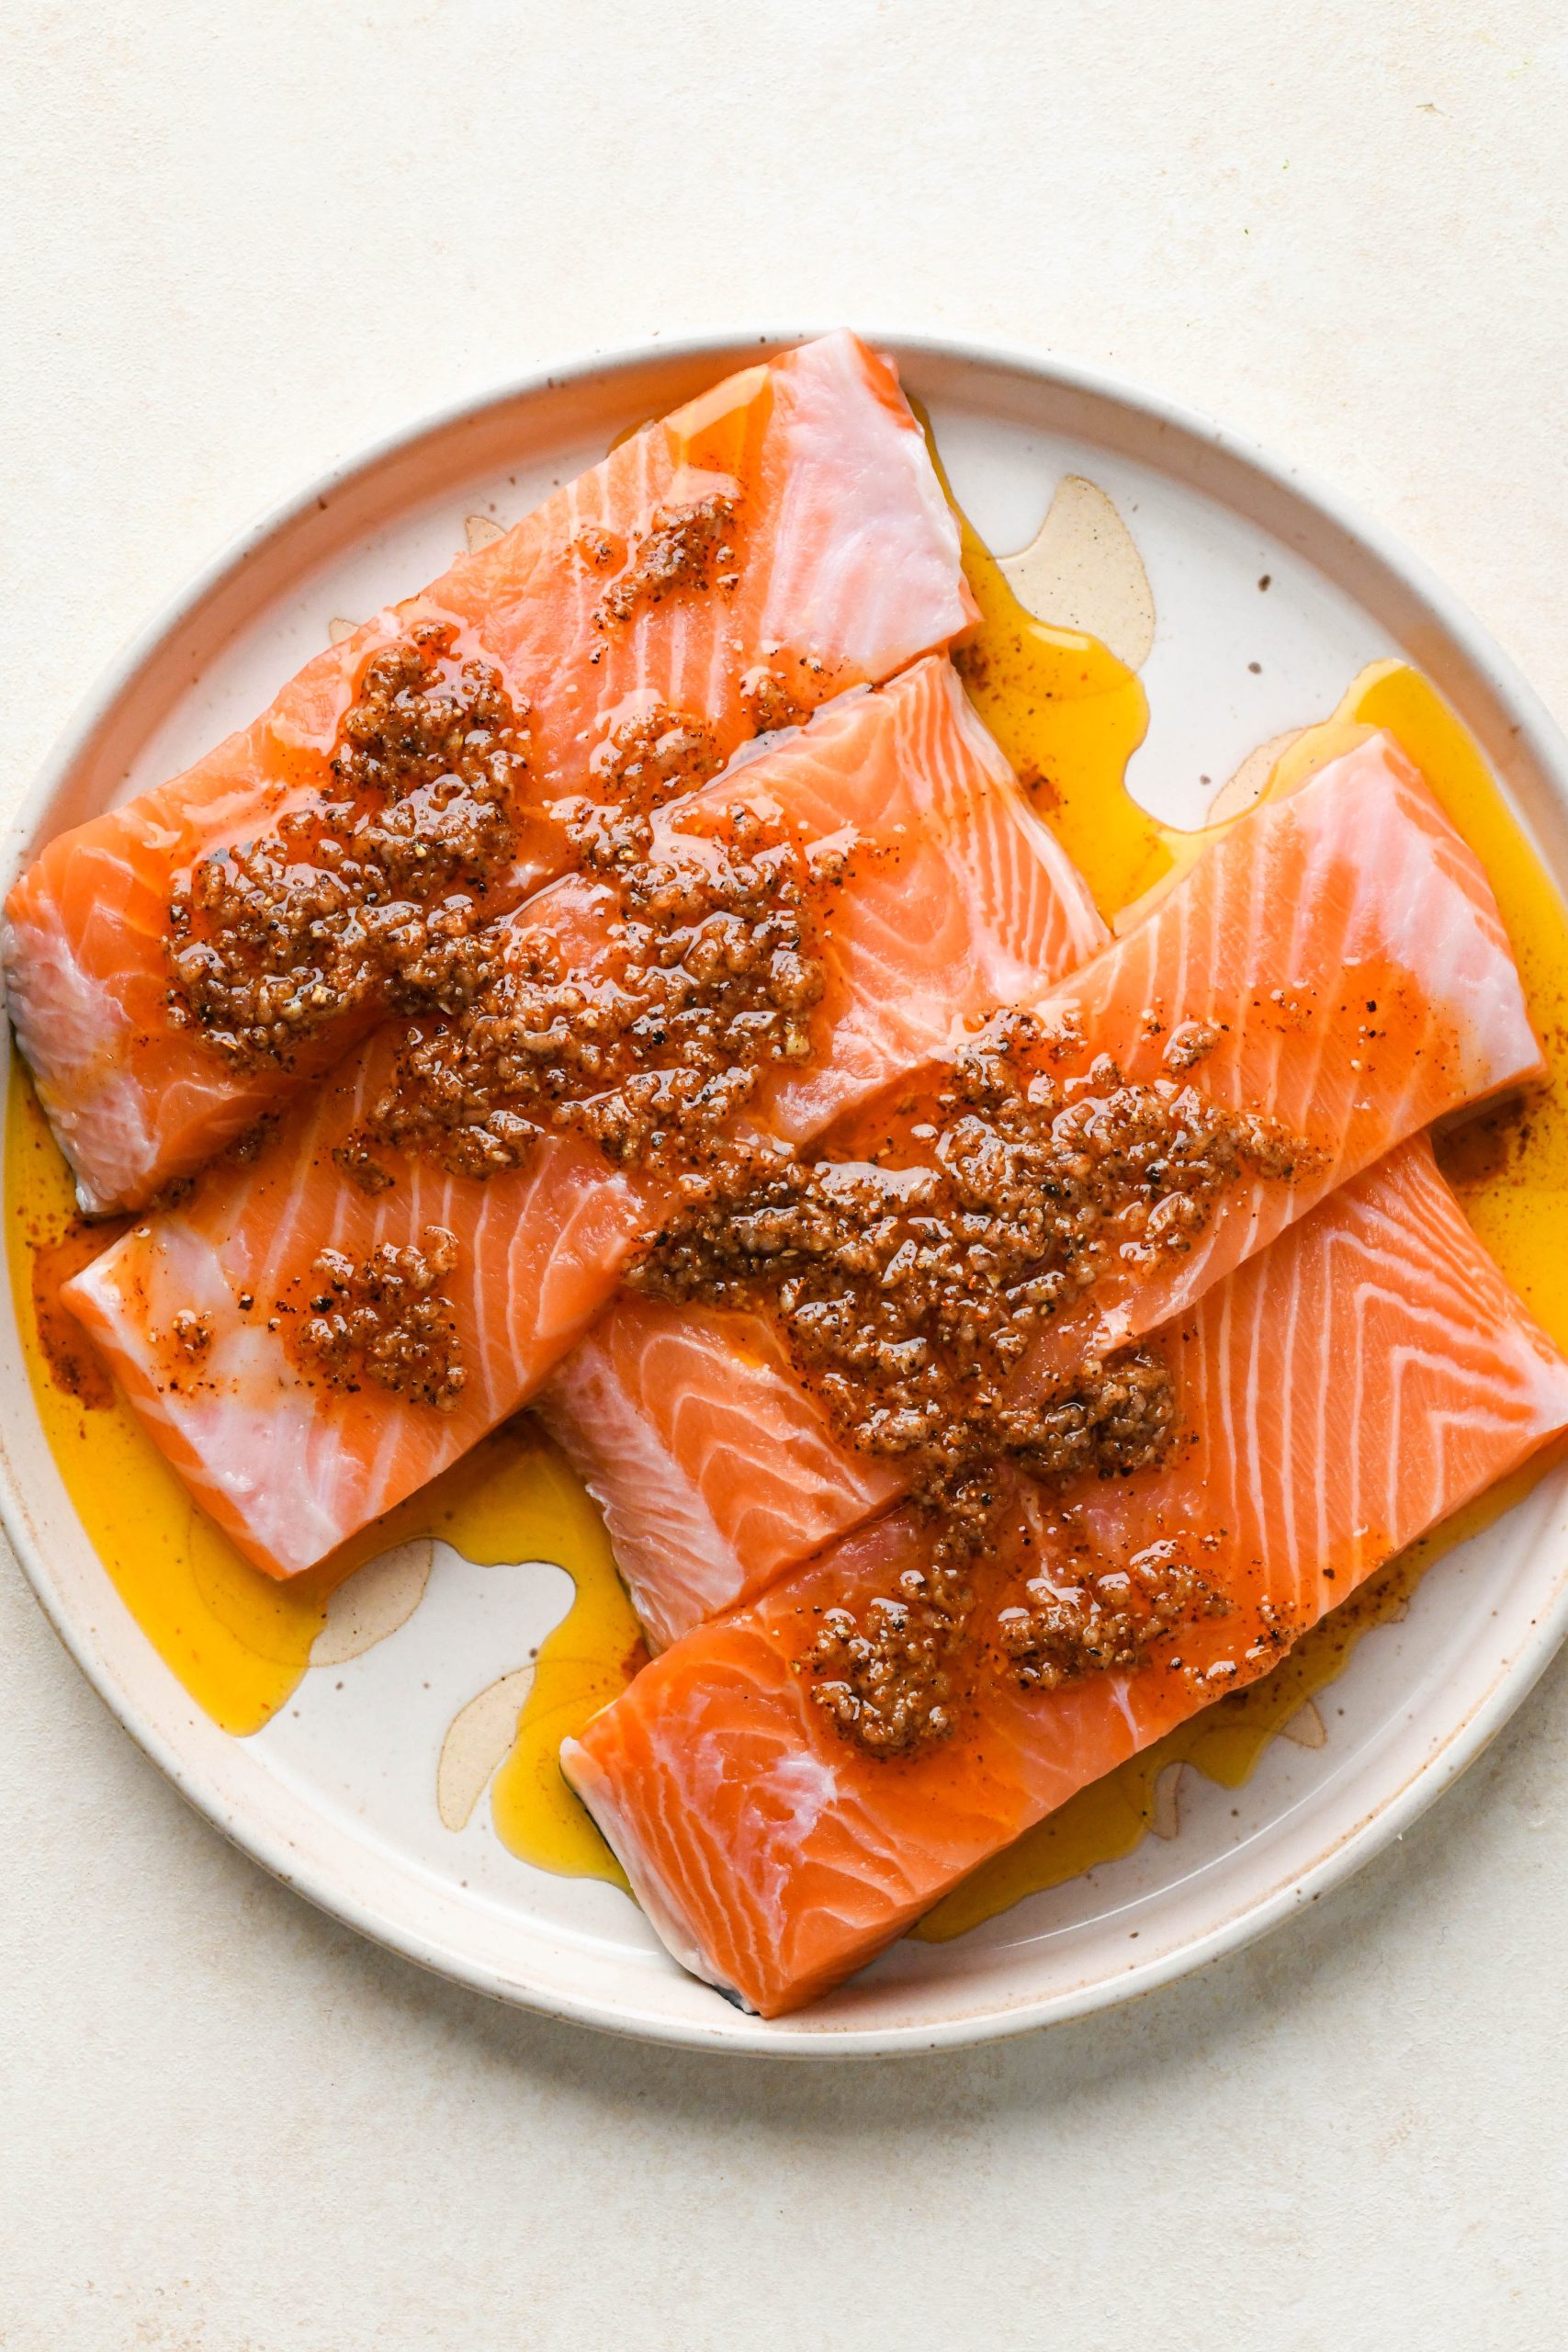 How to make baked salmon: Salmon fillets on a ceramic plate drizzled with avocado oil and spice mixture.